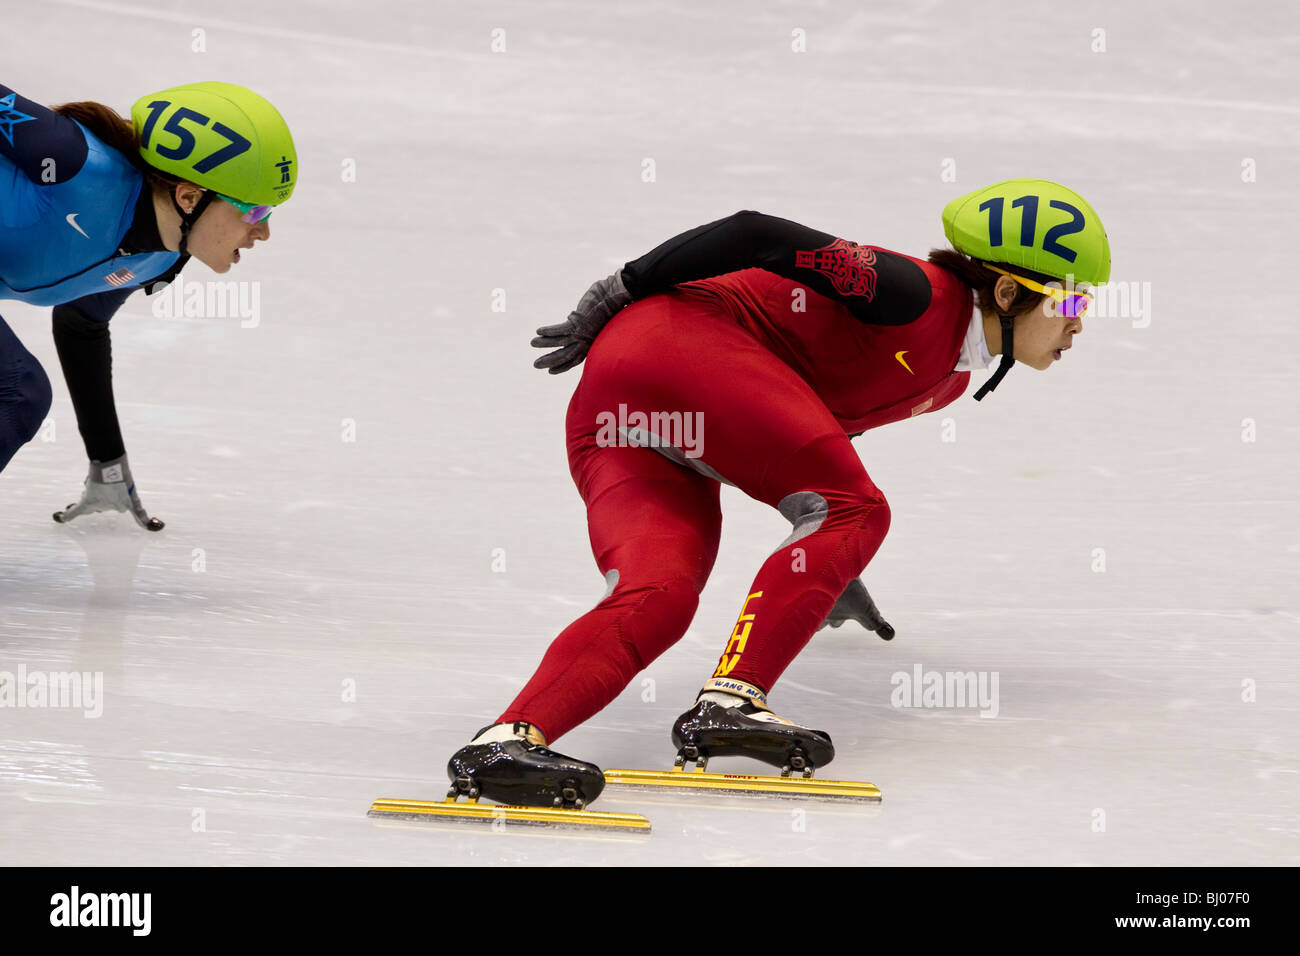 Wang Meng (CHN) competing in the Short Track Speed Skating Women's 1000m final event at the 2010 Olympic Winter Games Stock Photo